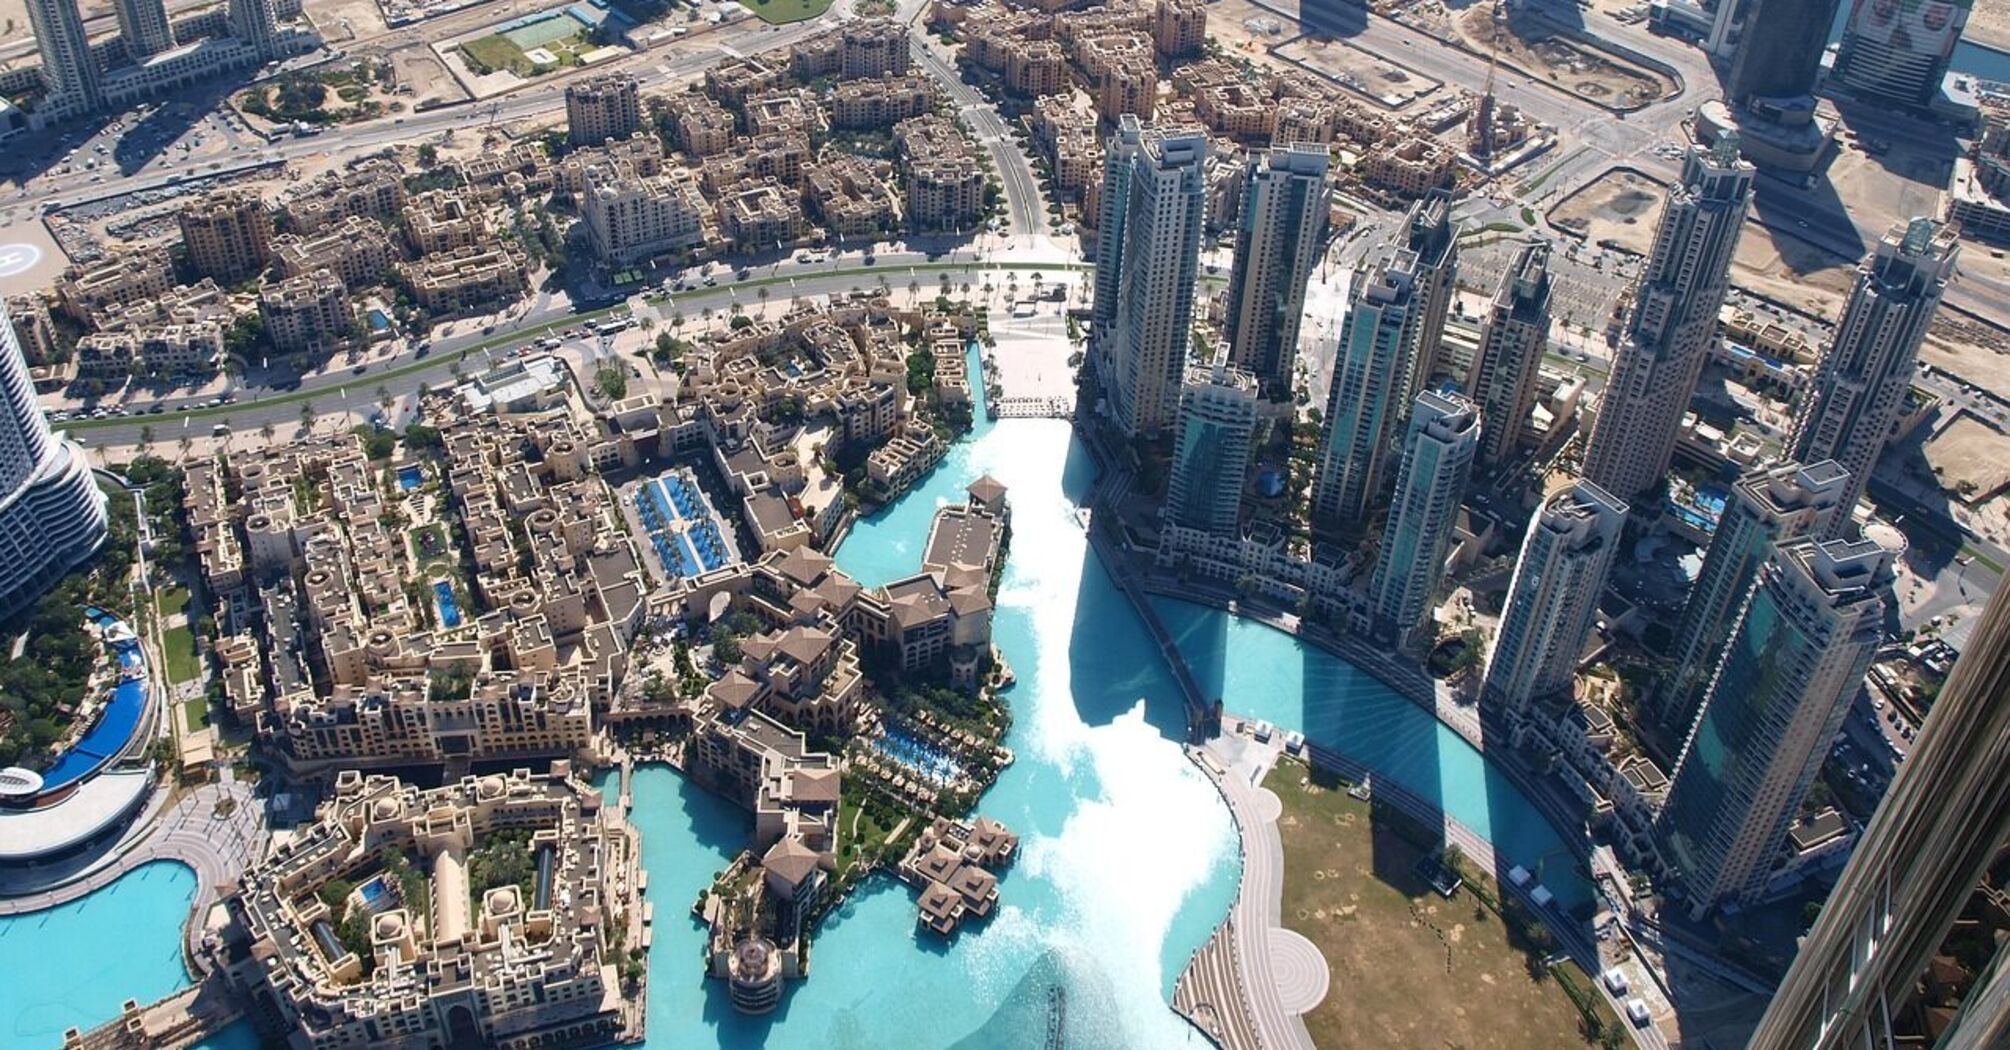 A tourist named 11 things she would like to know about Dubai before planning a trip